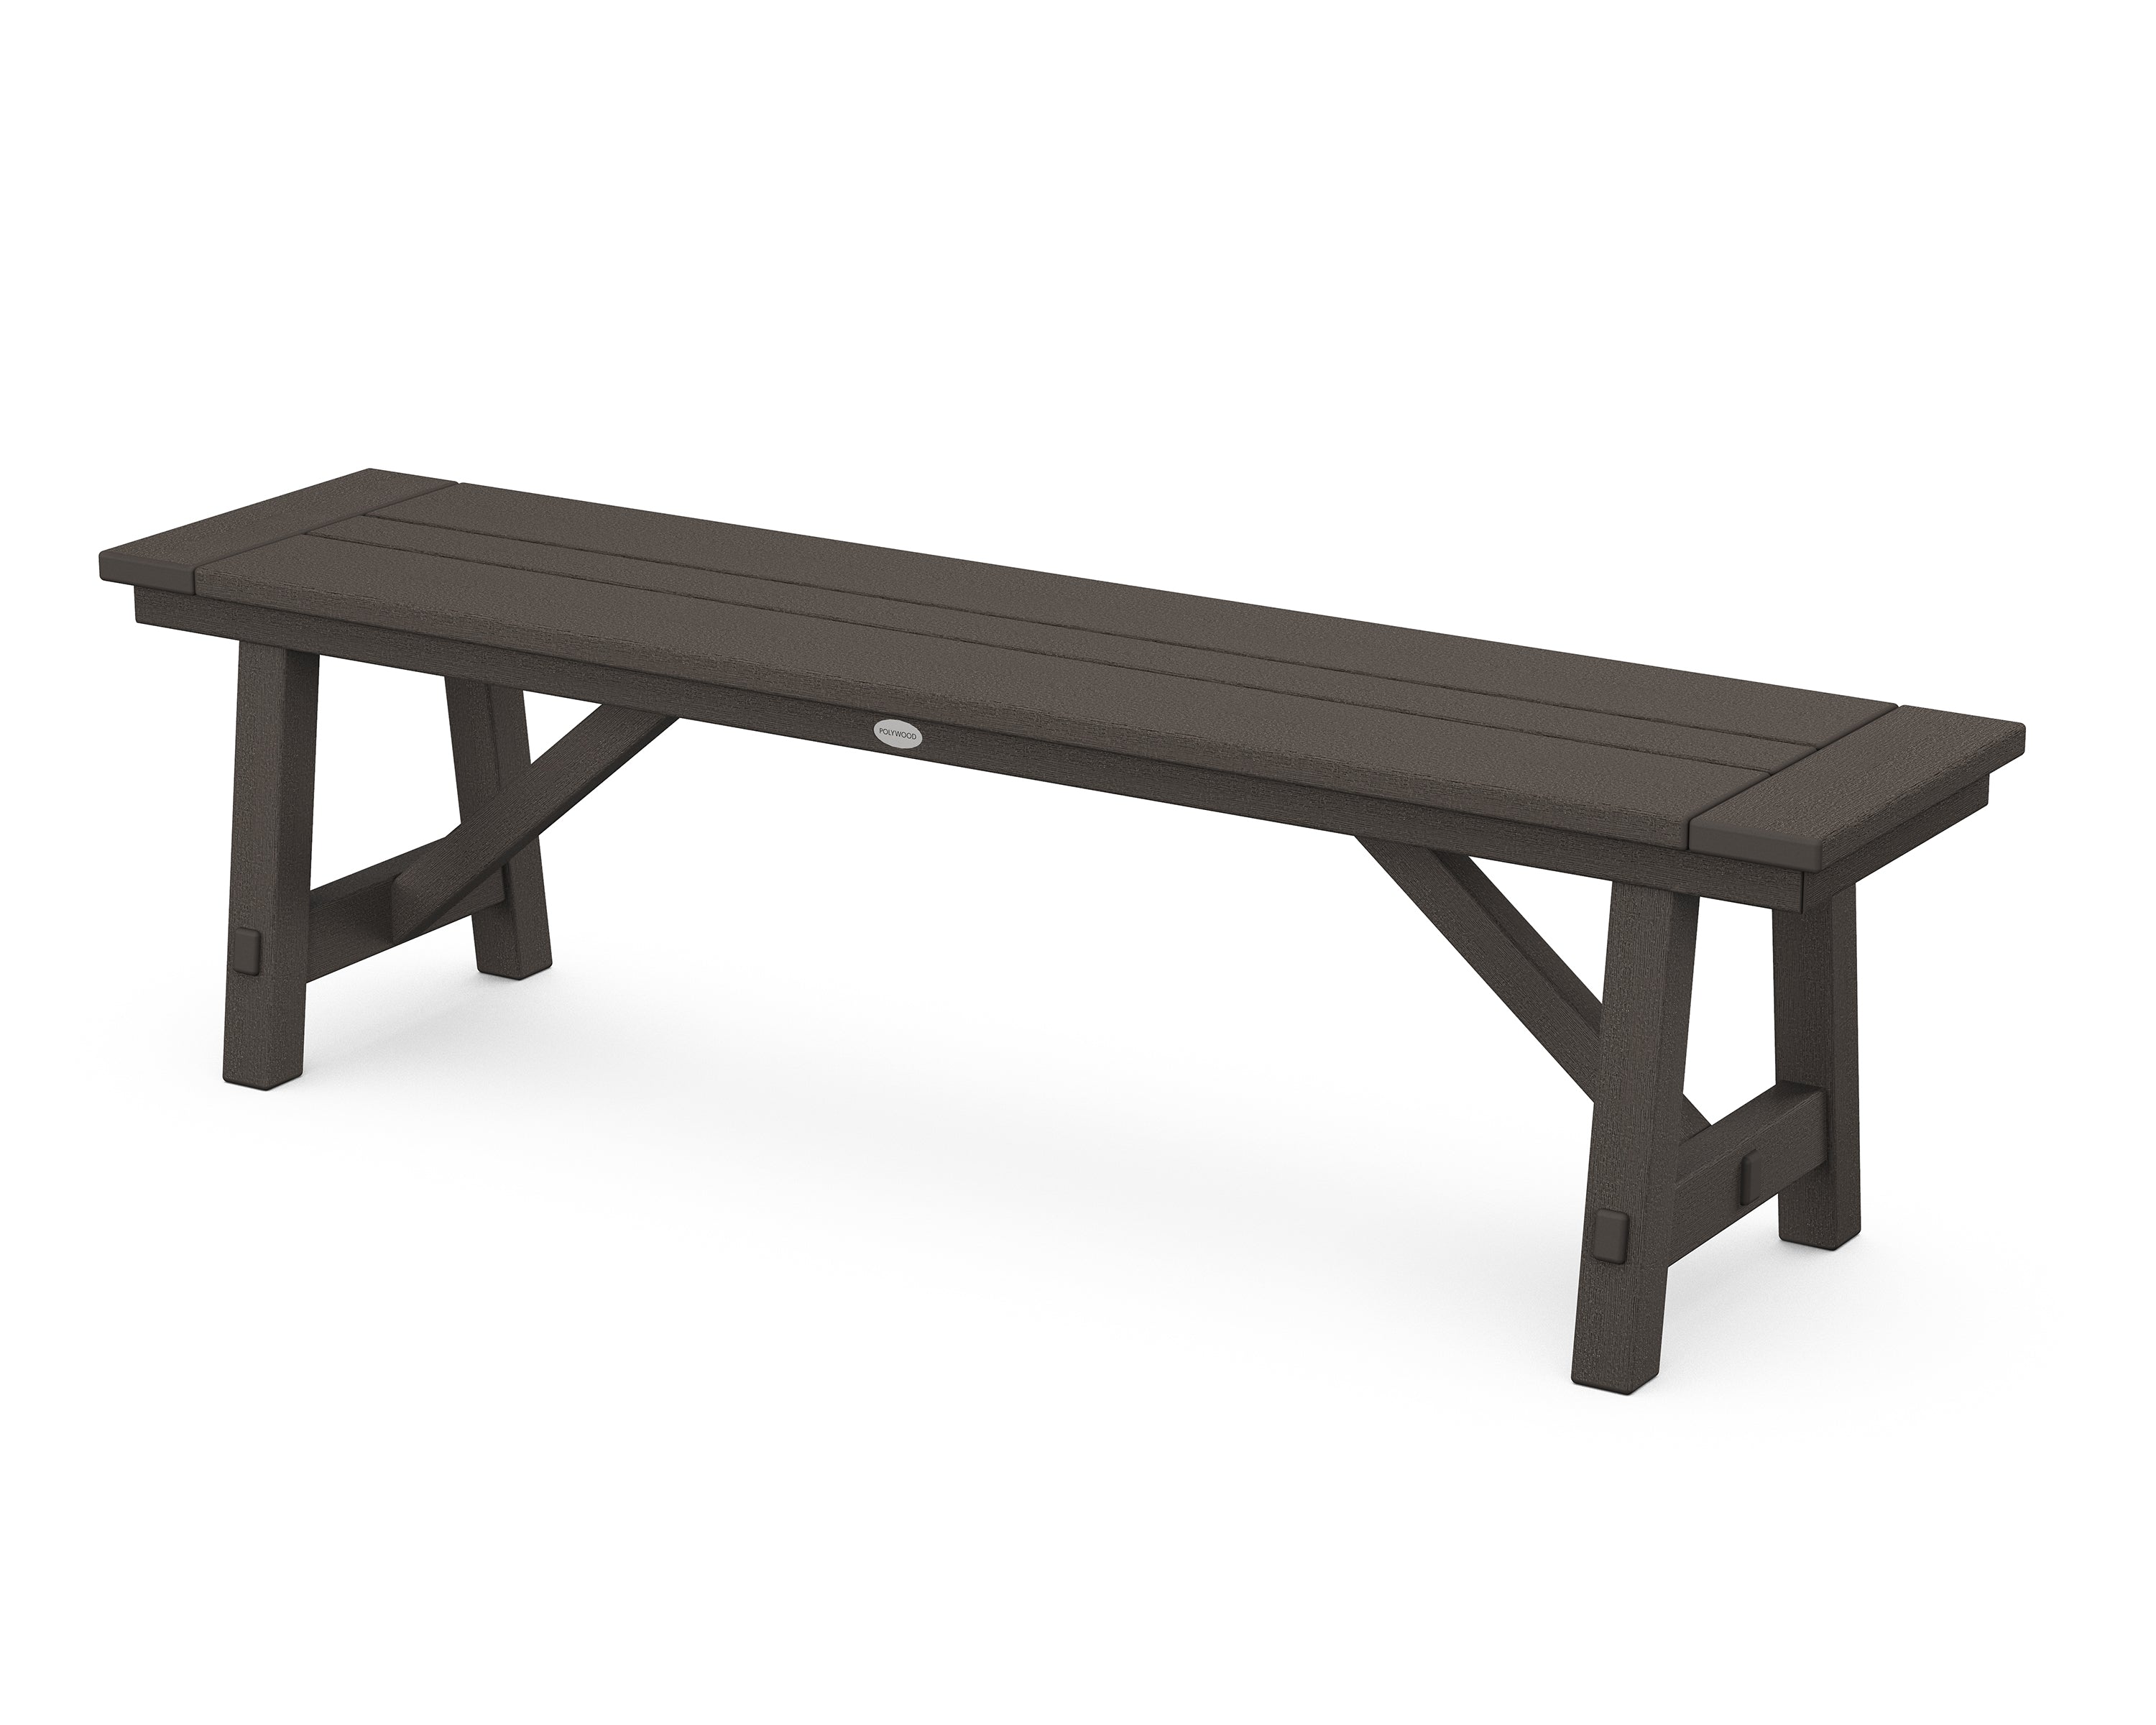 POLYWOOD® Rustic Farmhouse 60" Backless Bench in Vintage Coffee